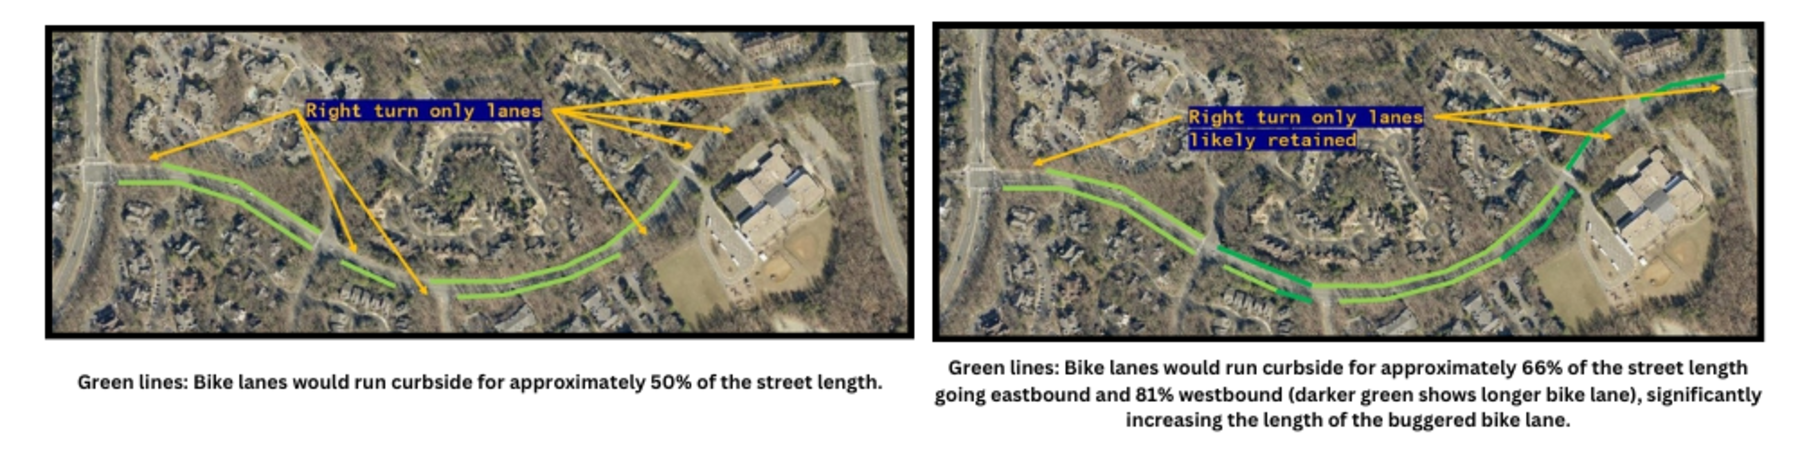 proposal to remove five right turn lanes to improve bicycle safety.